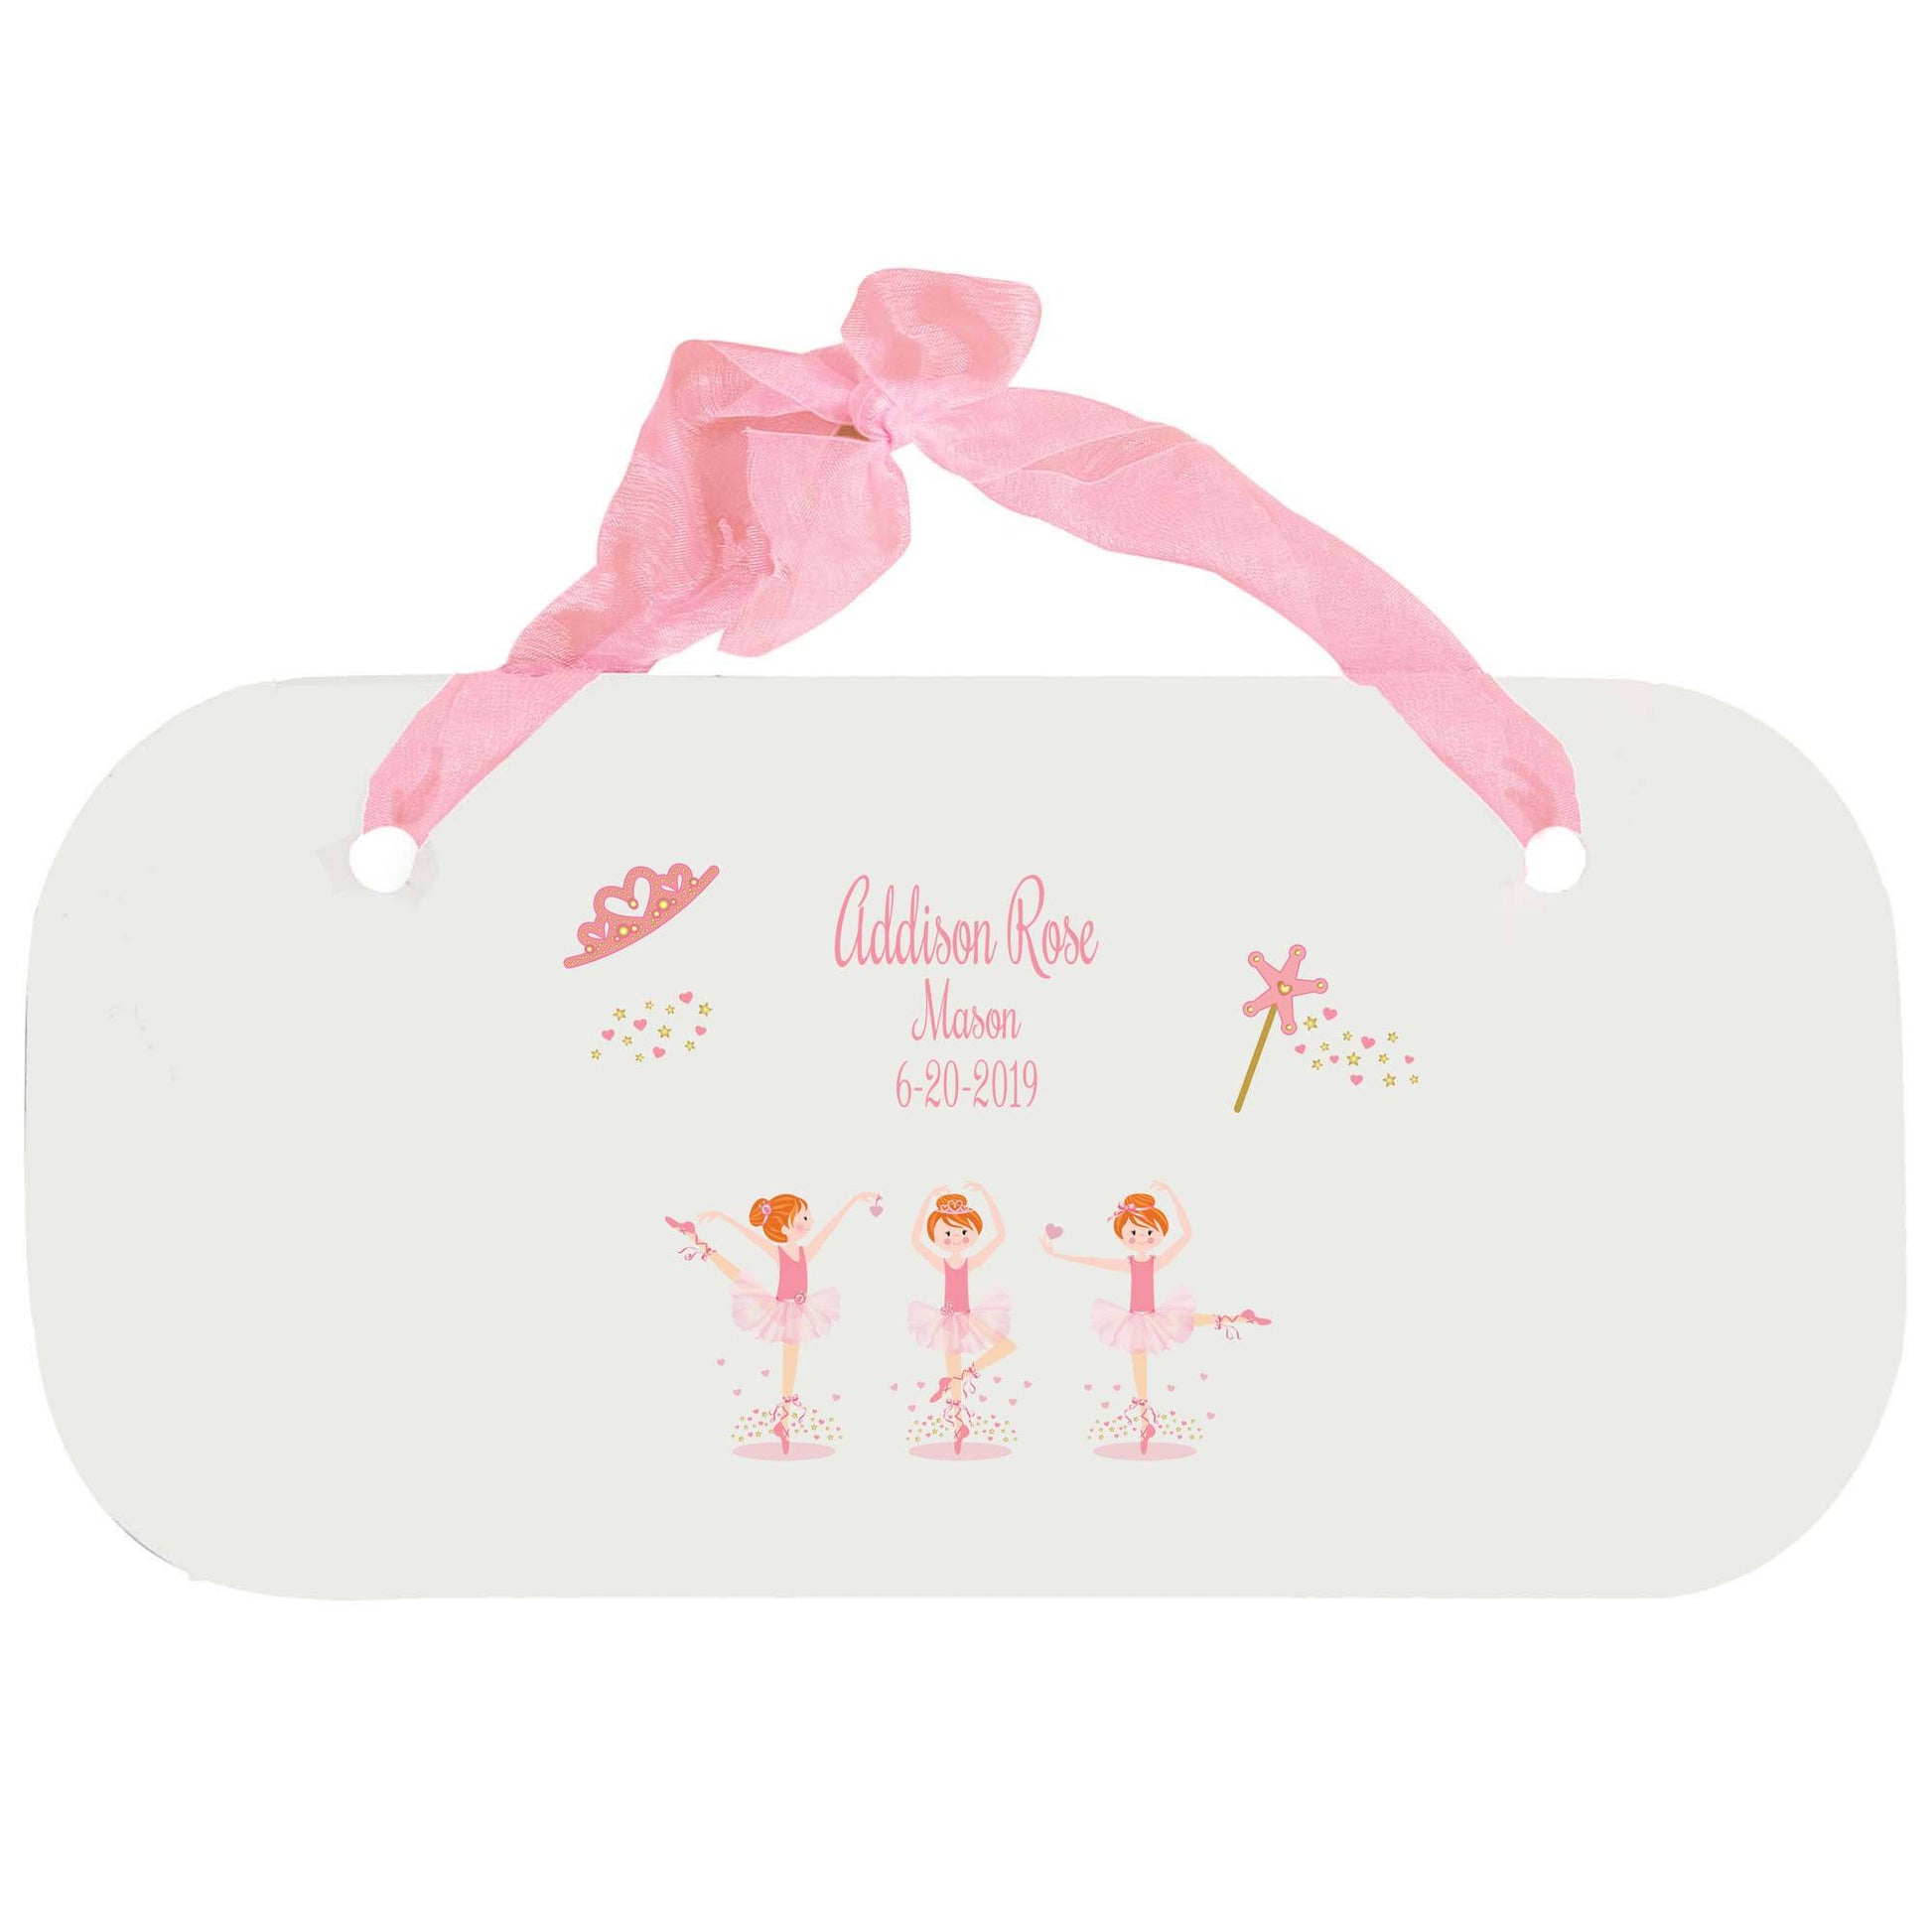 Personalized Girls Wall Plaque with Ballerina Red Hair design